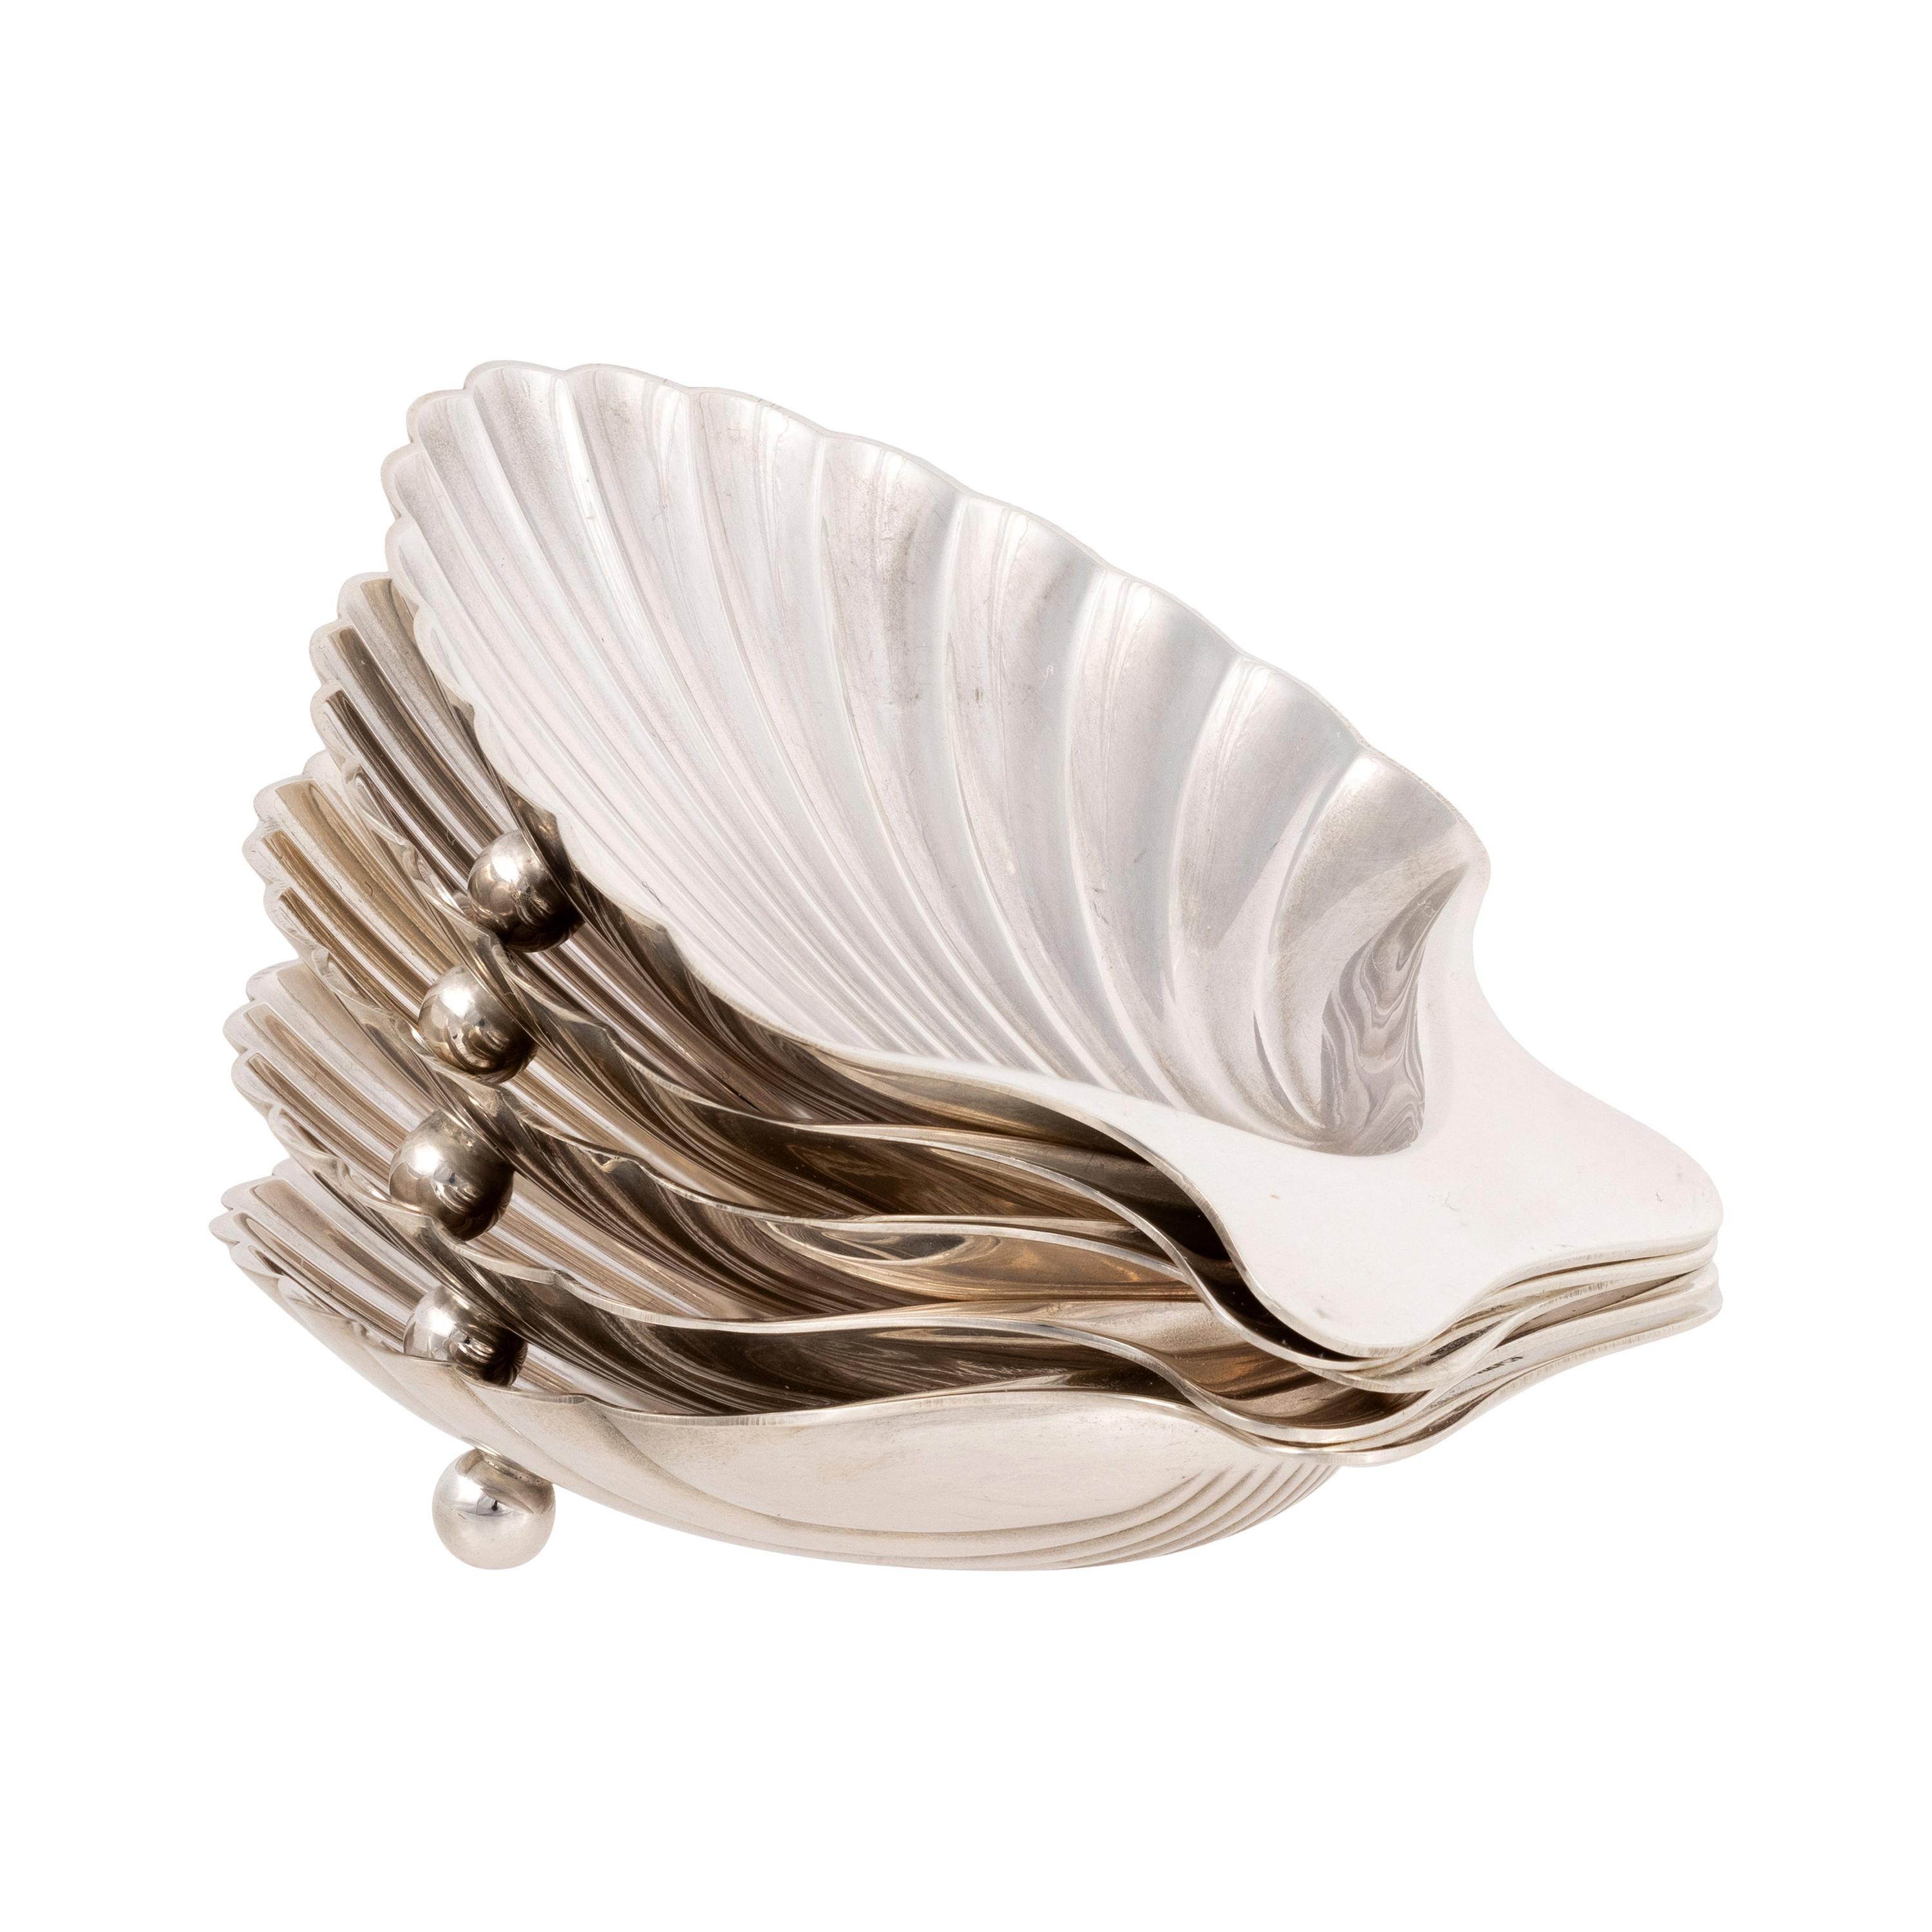 Tiffany & Co. Sterling Silver Coquille Dishes